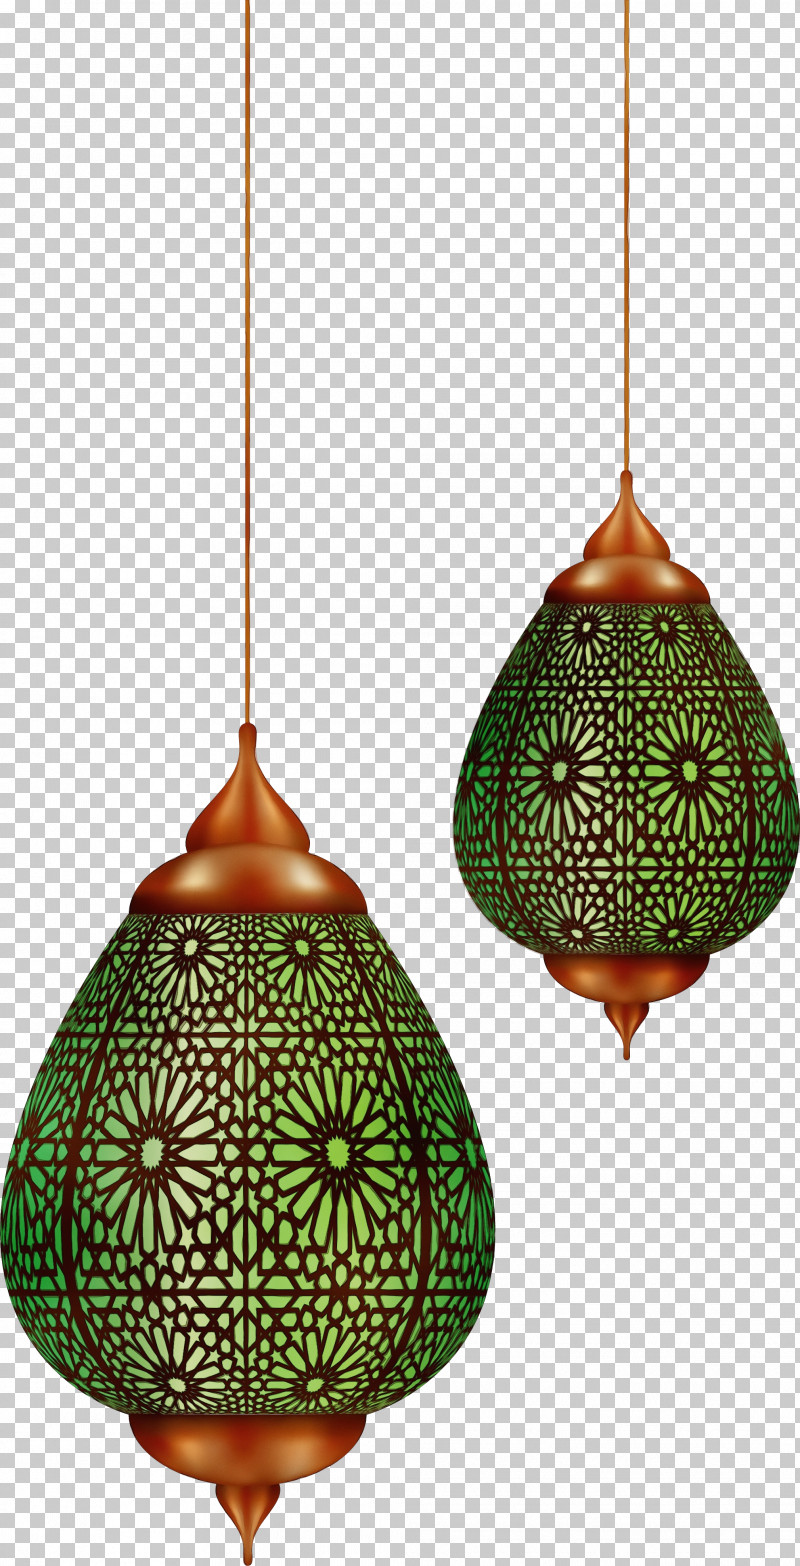 Lighting Lighting Accessory Lampshade Light Fixture Ceiling Fixture PNG, Clipart, Ceiling Fixture, Interior Design, Lamp, Lampshade, Light Fixture Free PNG Download